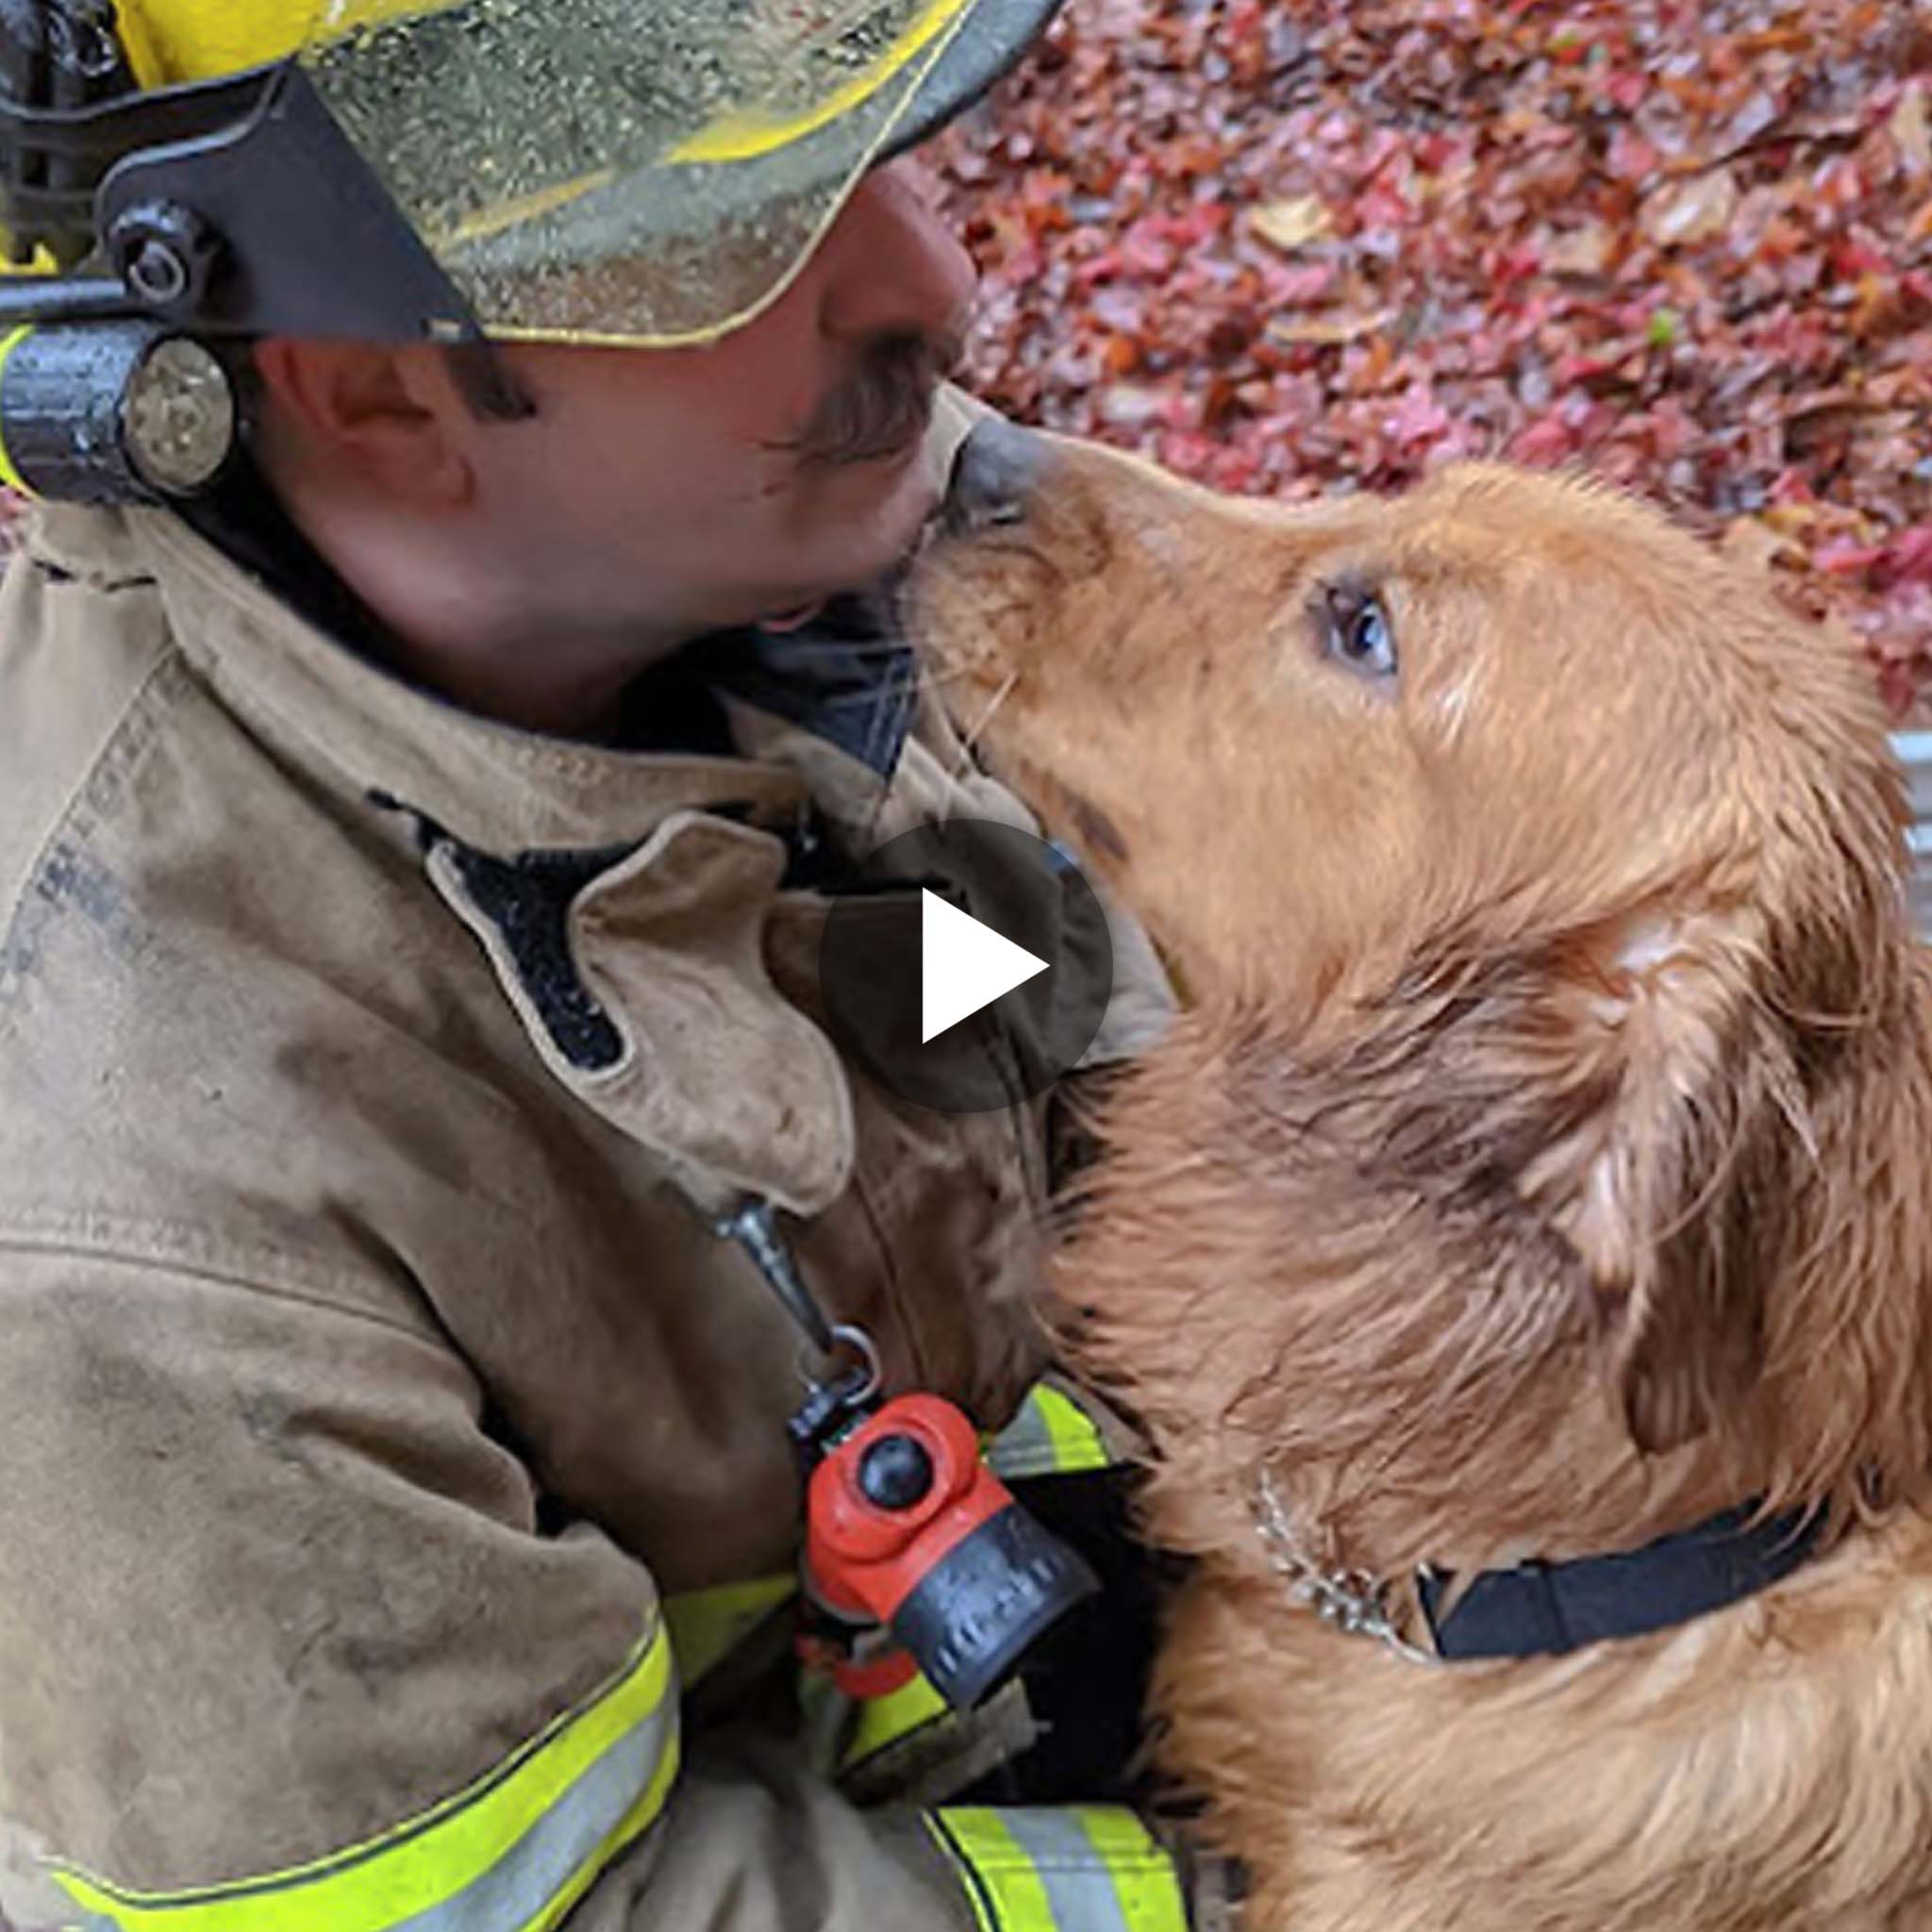 “Firefighters Demonstrate Dedication to Saving Lives, Including Our Four-Legged Friends: Rescuing a Dog That Fell into a Well”